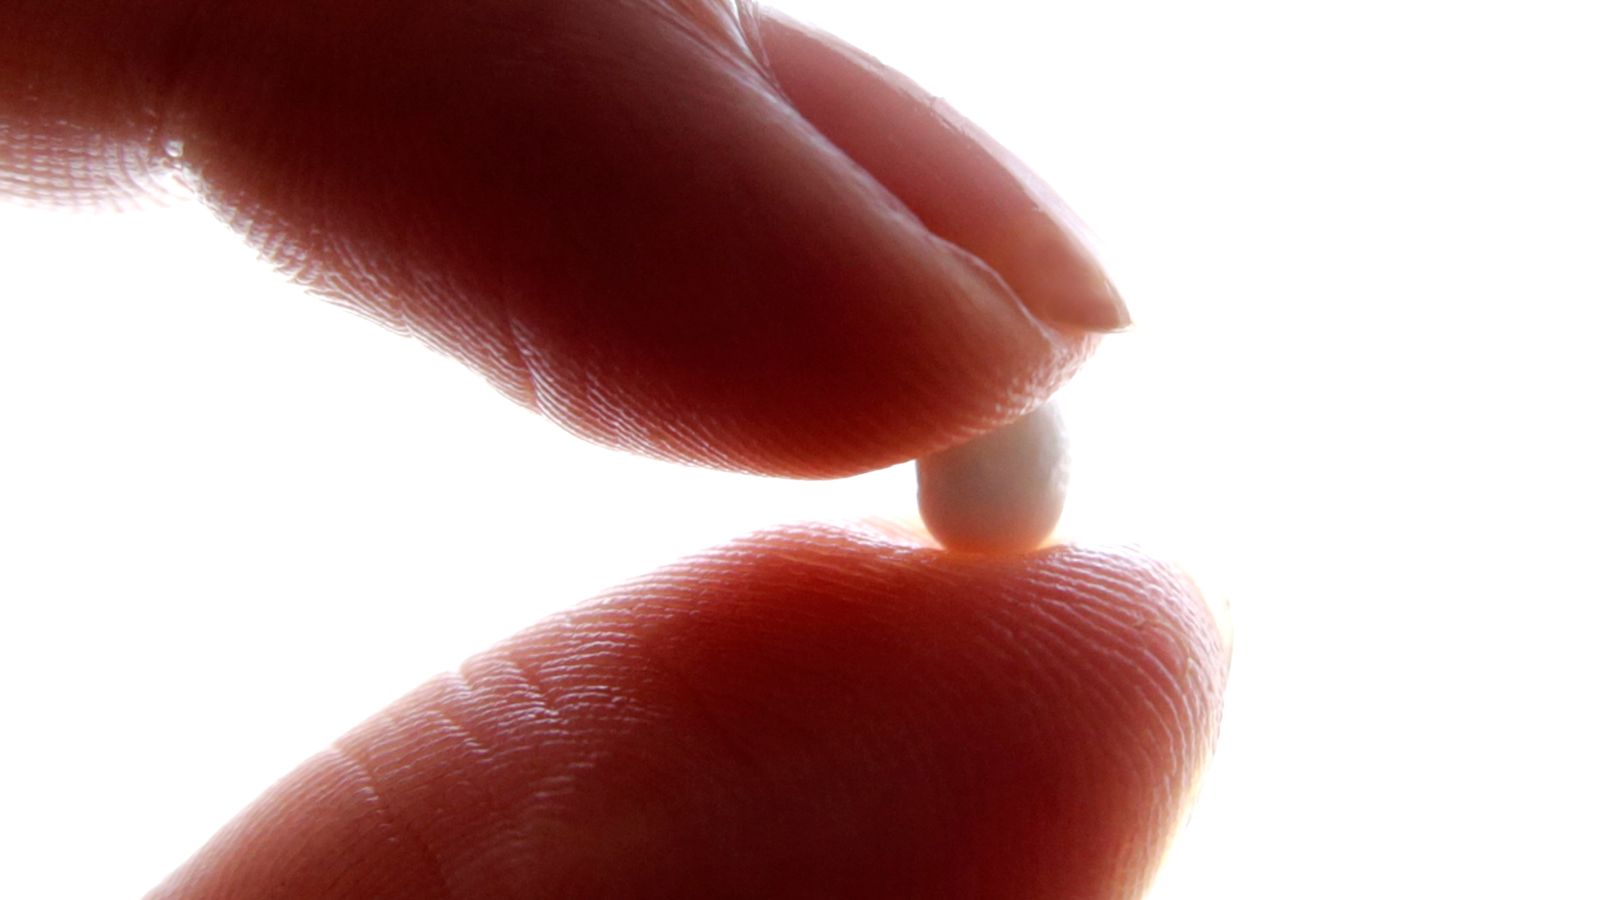 Millions of women will be able to get the pill for free from chemists under new NHS plans | Science & Tech News